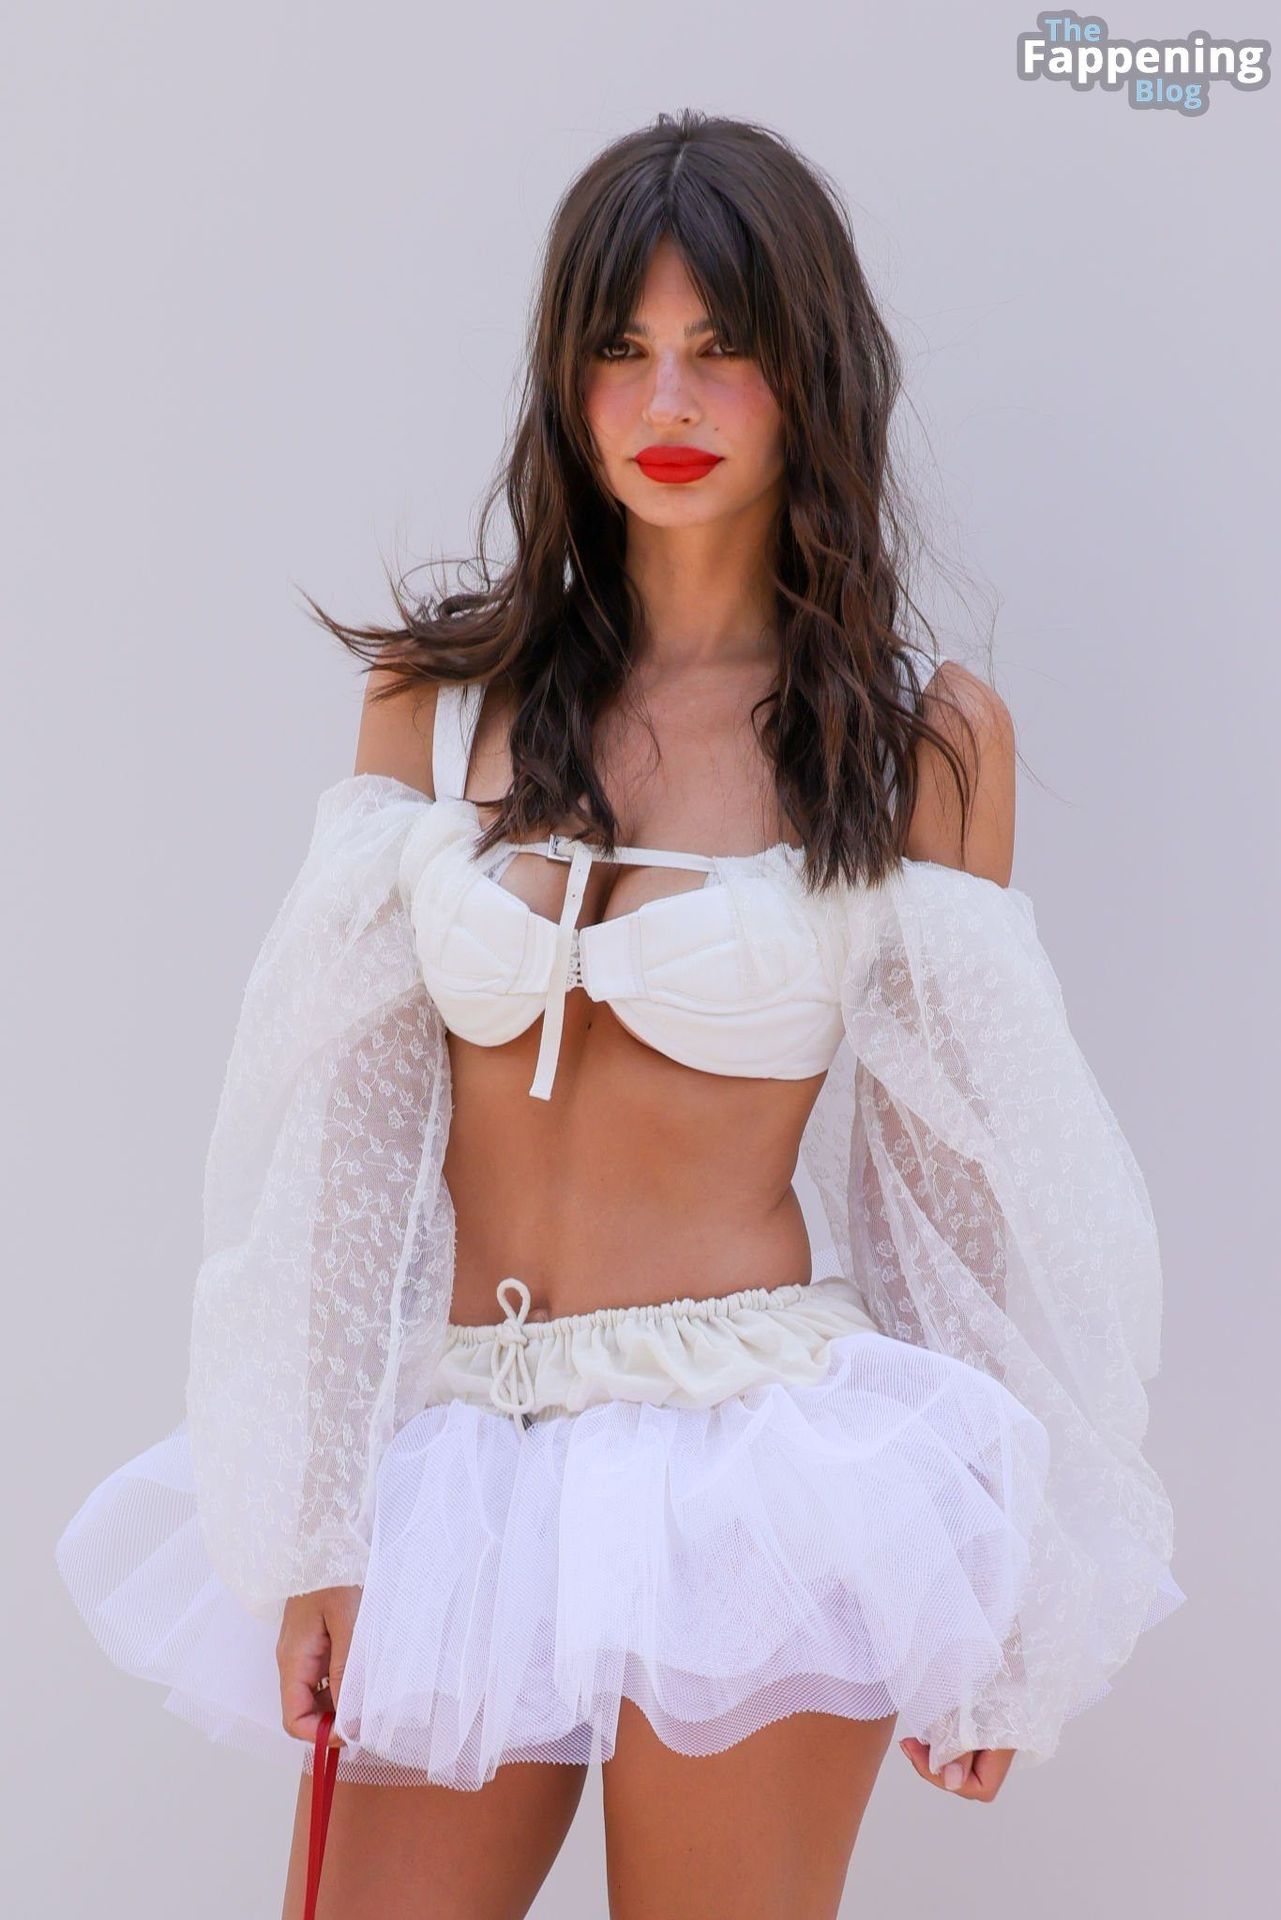 Emily Ratajkowski Shows Off Her Flawless Figure in a White Dress (75 New Photos + Video)